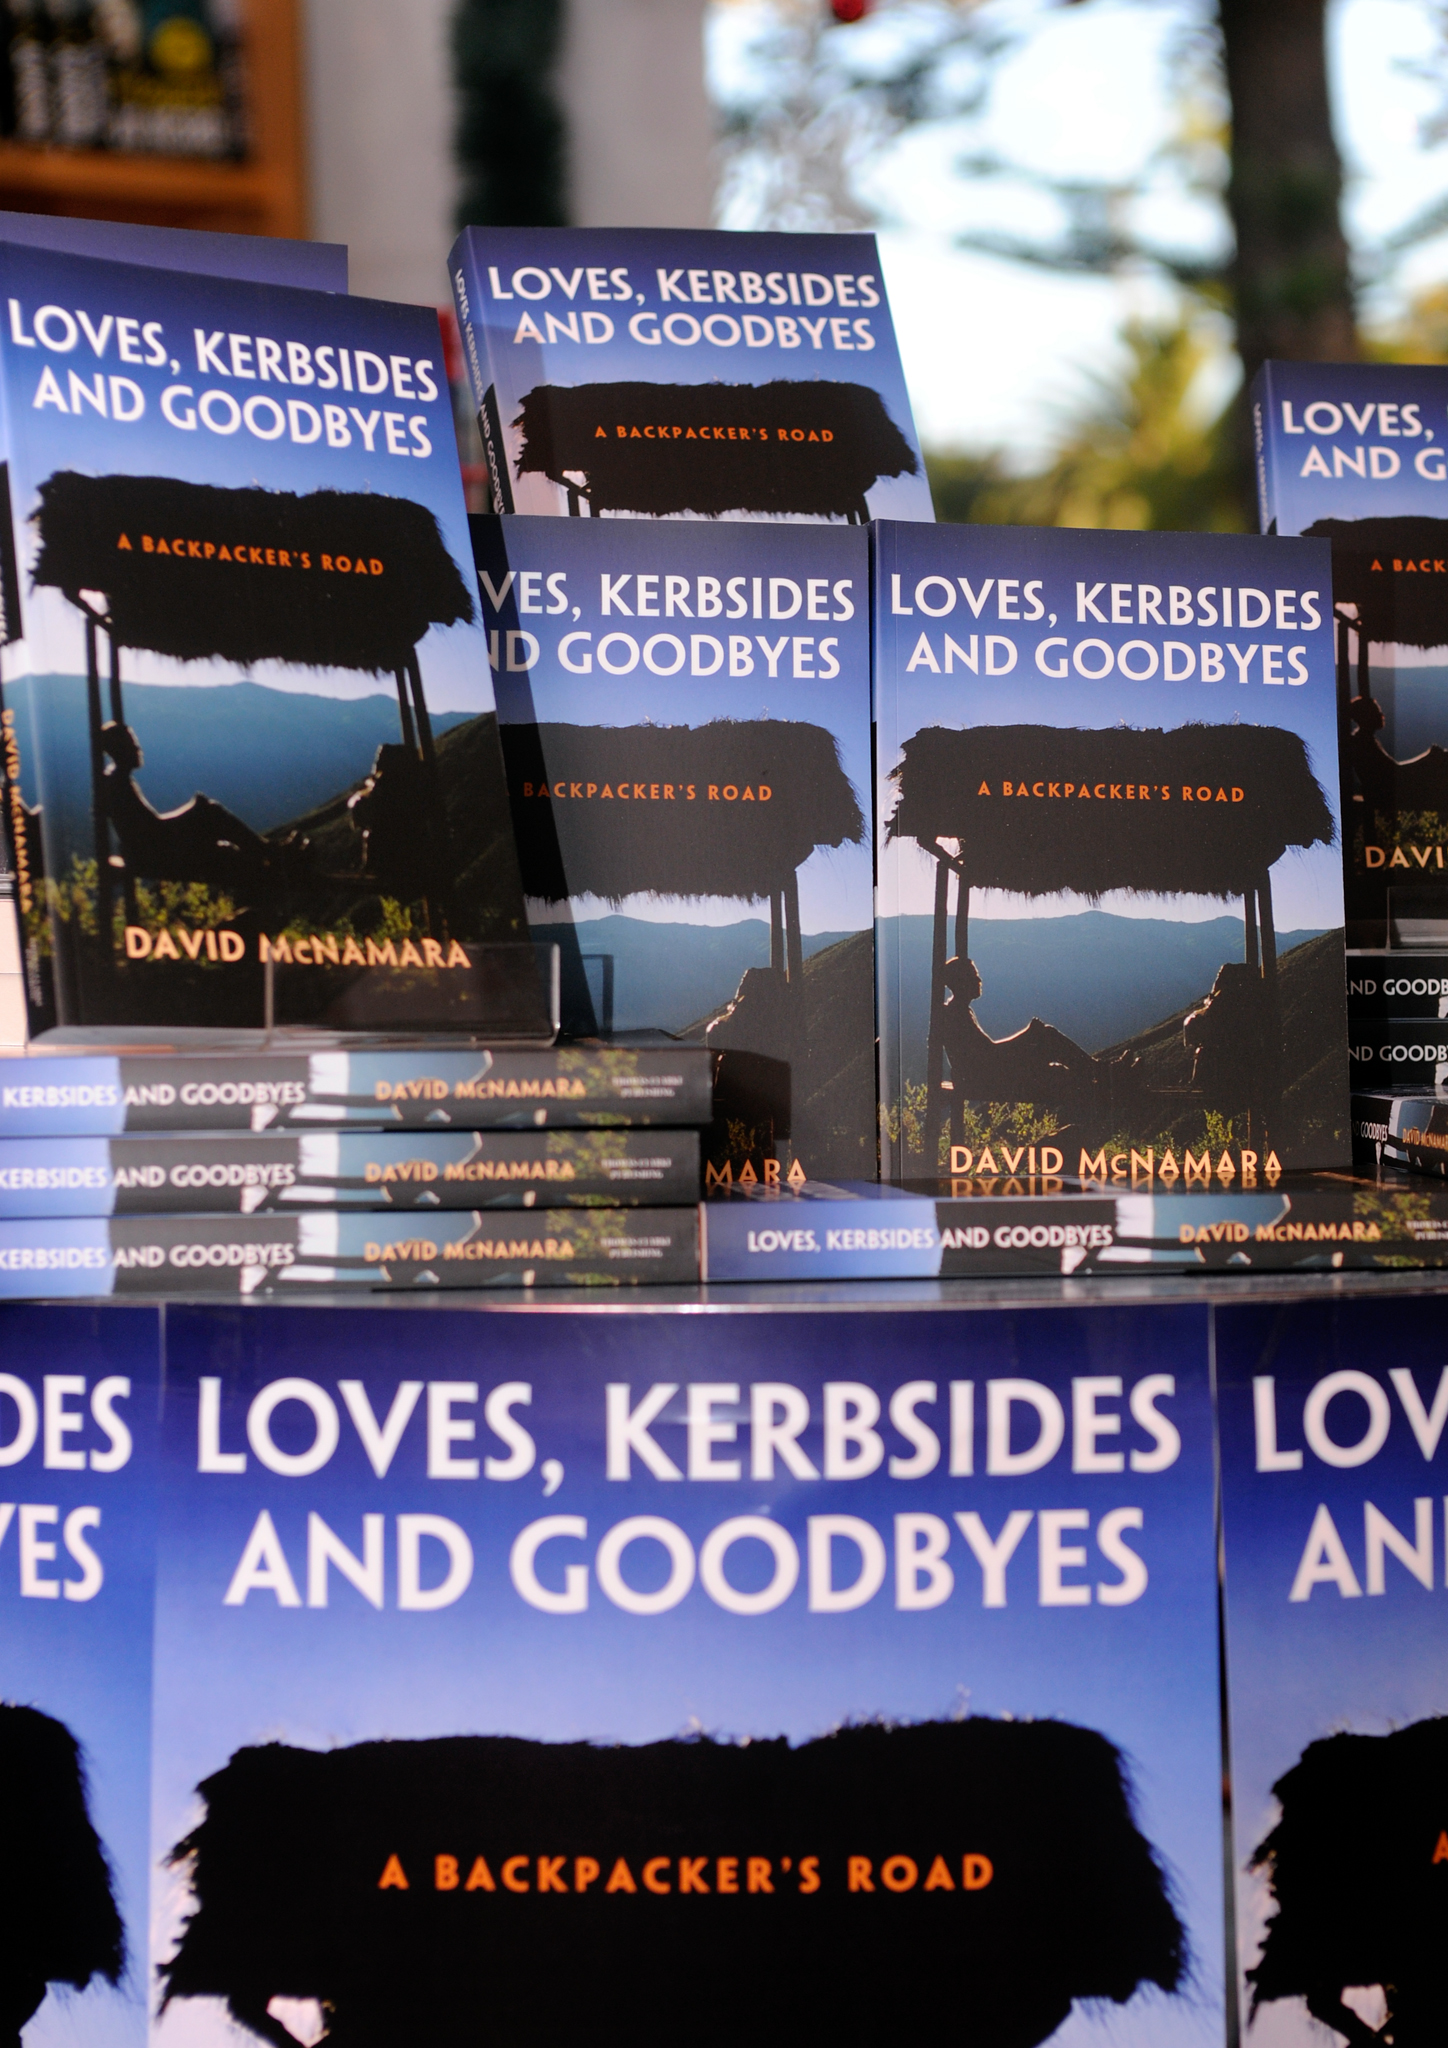 "Loves, Kerbsides & Goodbyes" ondisplay at the Book Launch